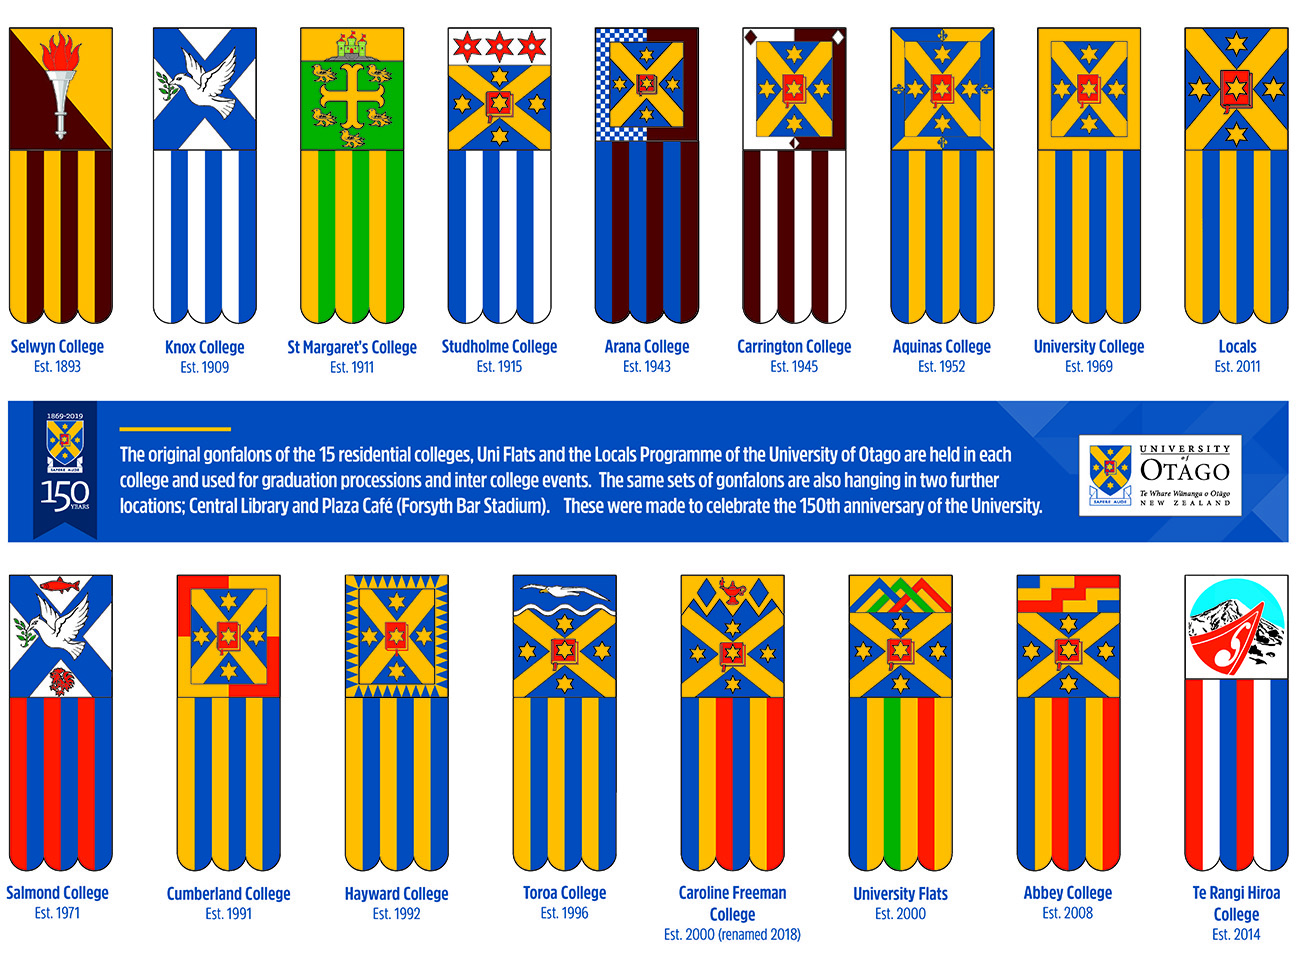 College flags A2-2019 - to be added to cwc2021 website image